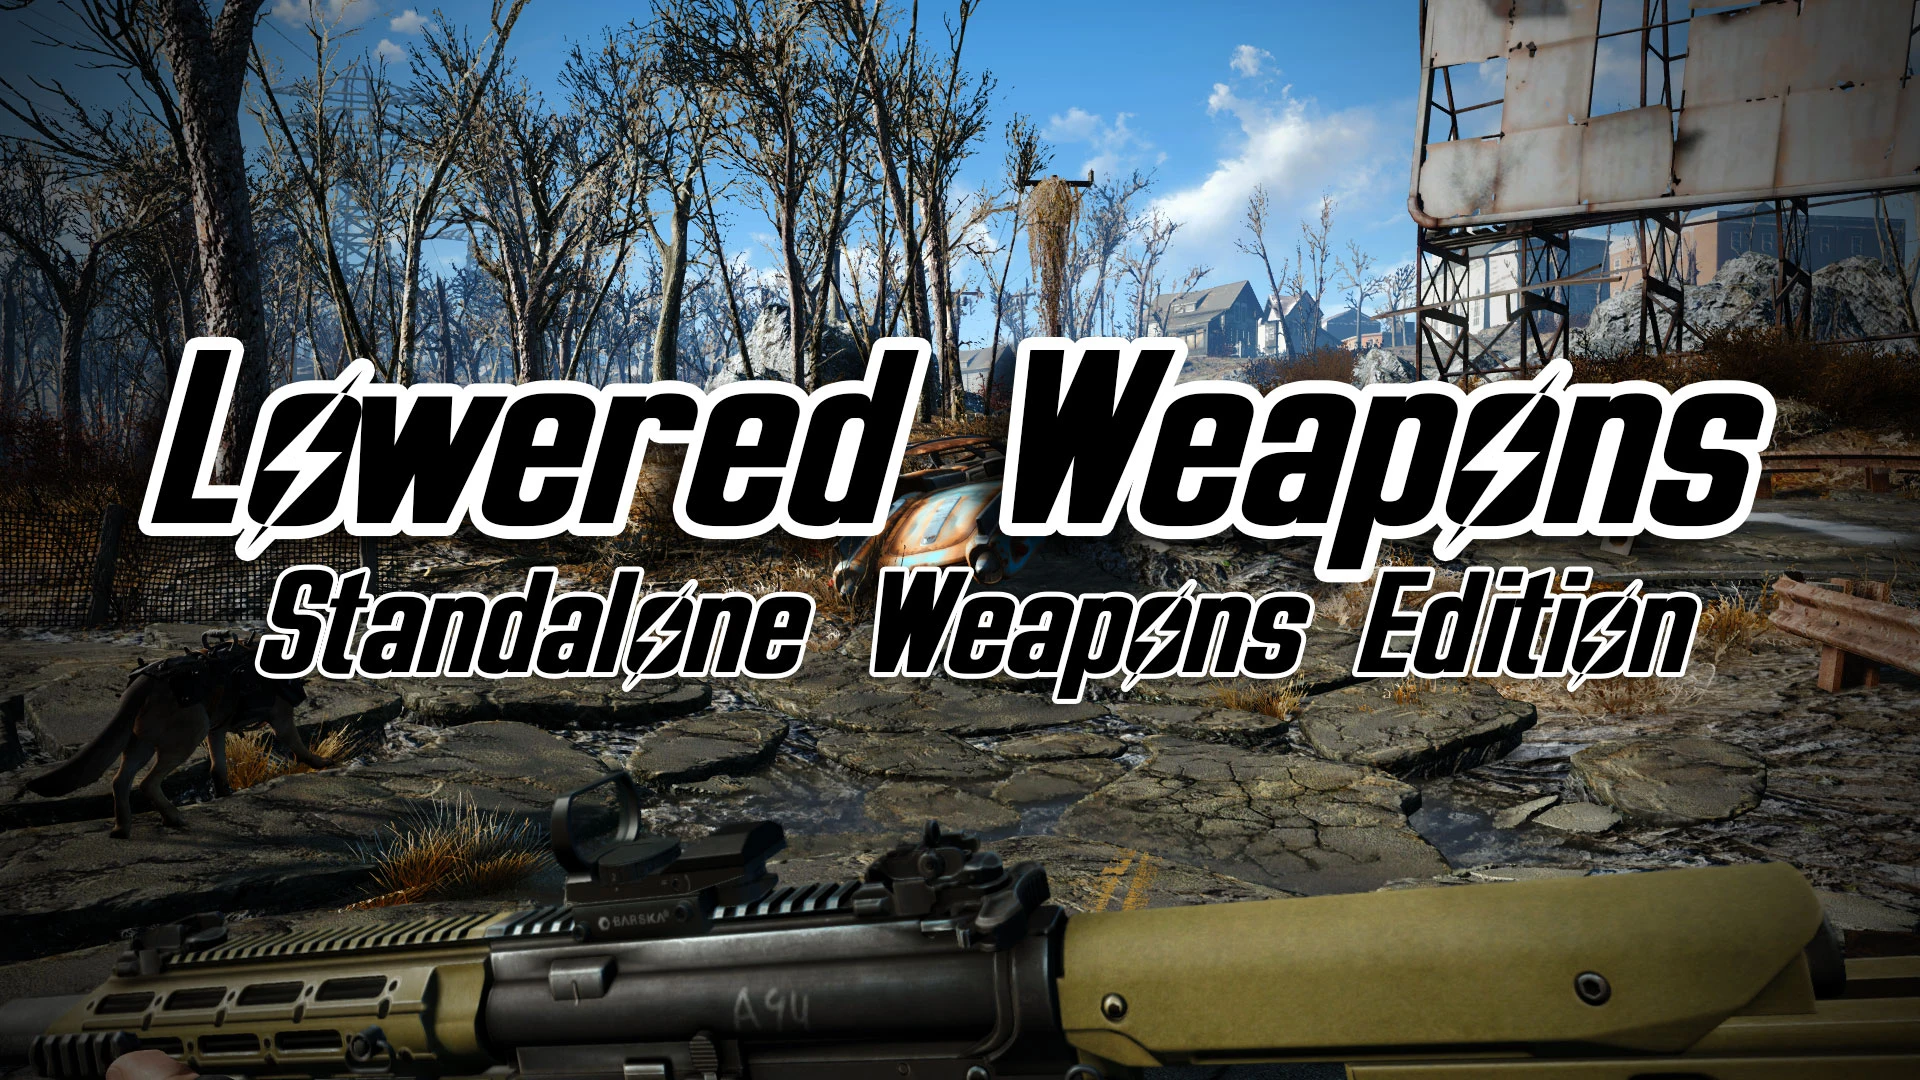 Button lowered weapons fallout 4 фото 4